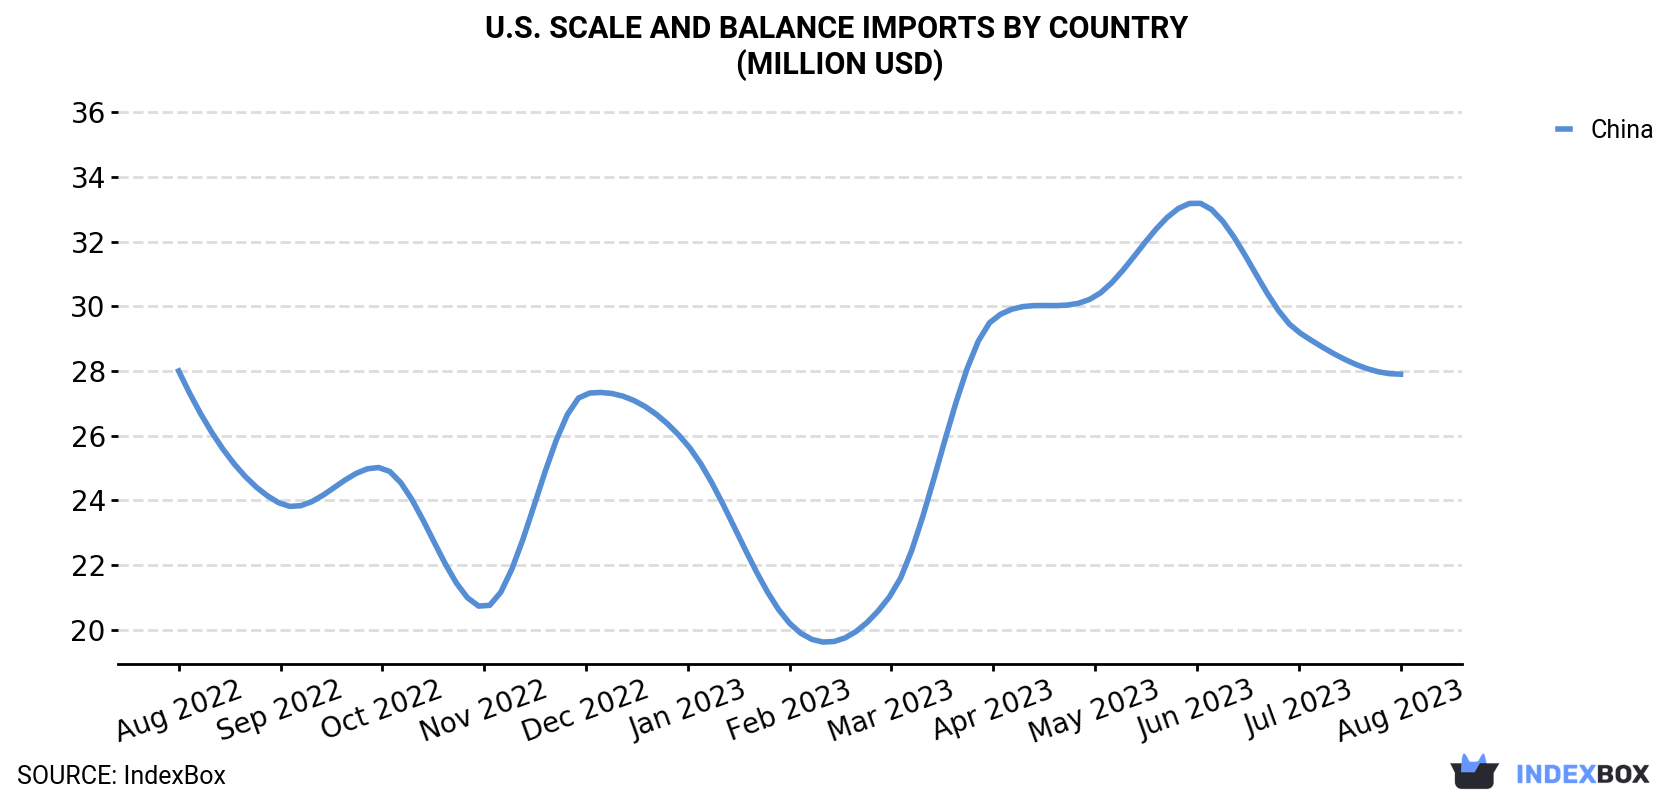 U.S. Scale And Balance Imports By Country (Million USD)